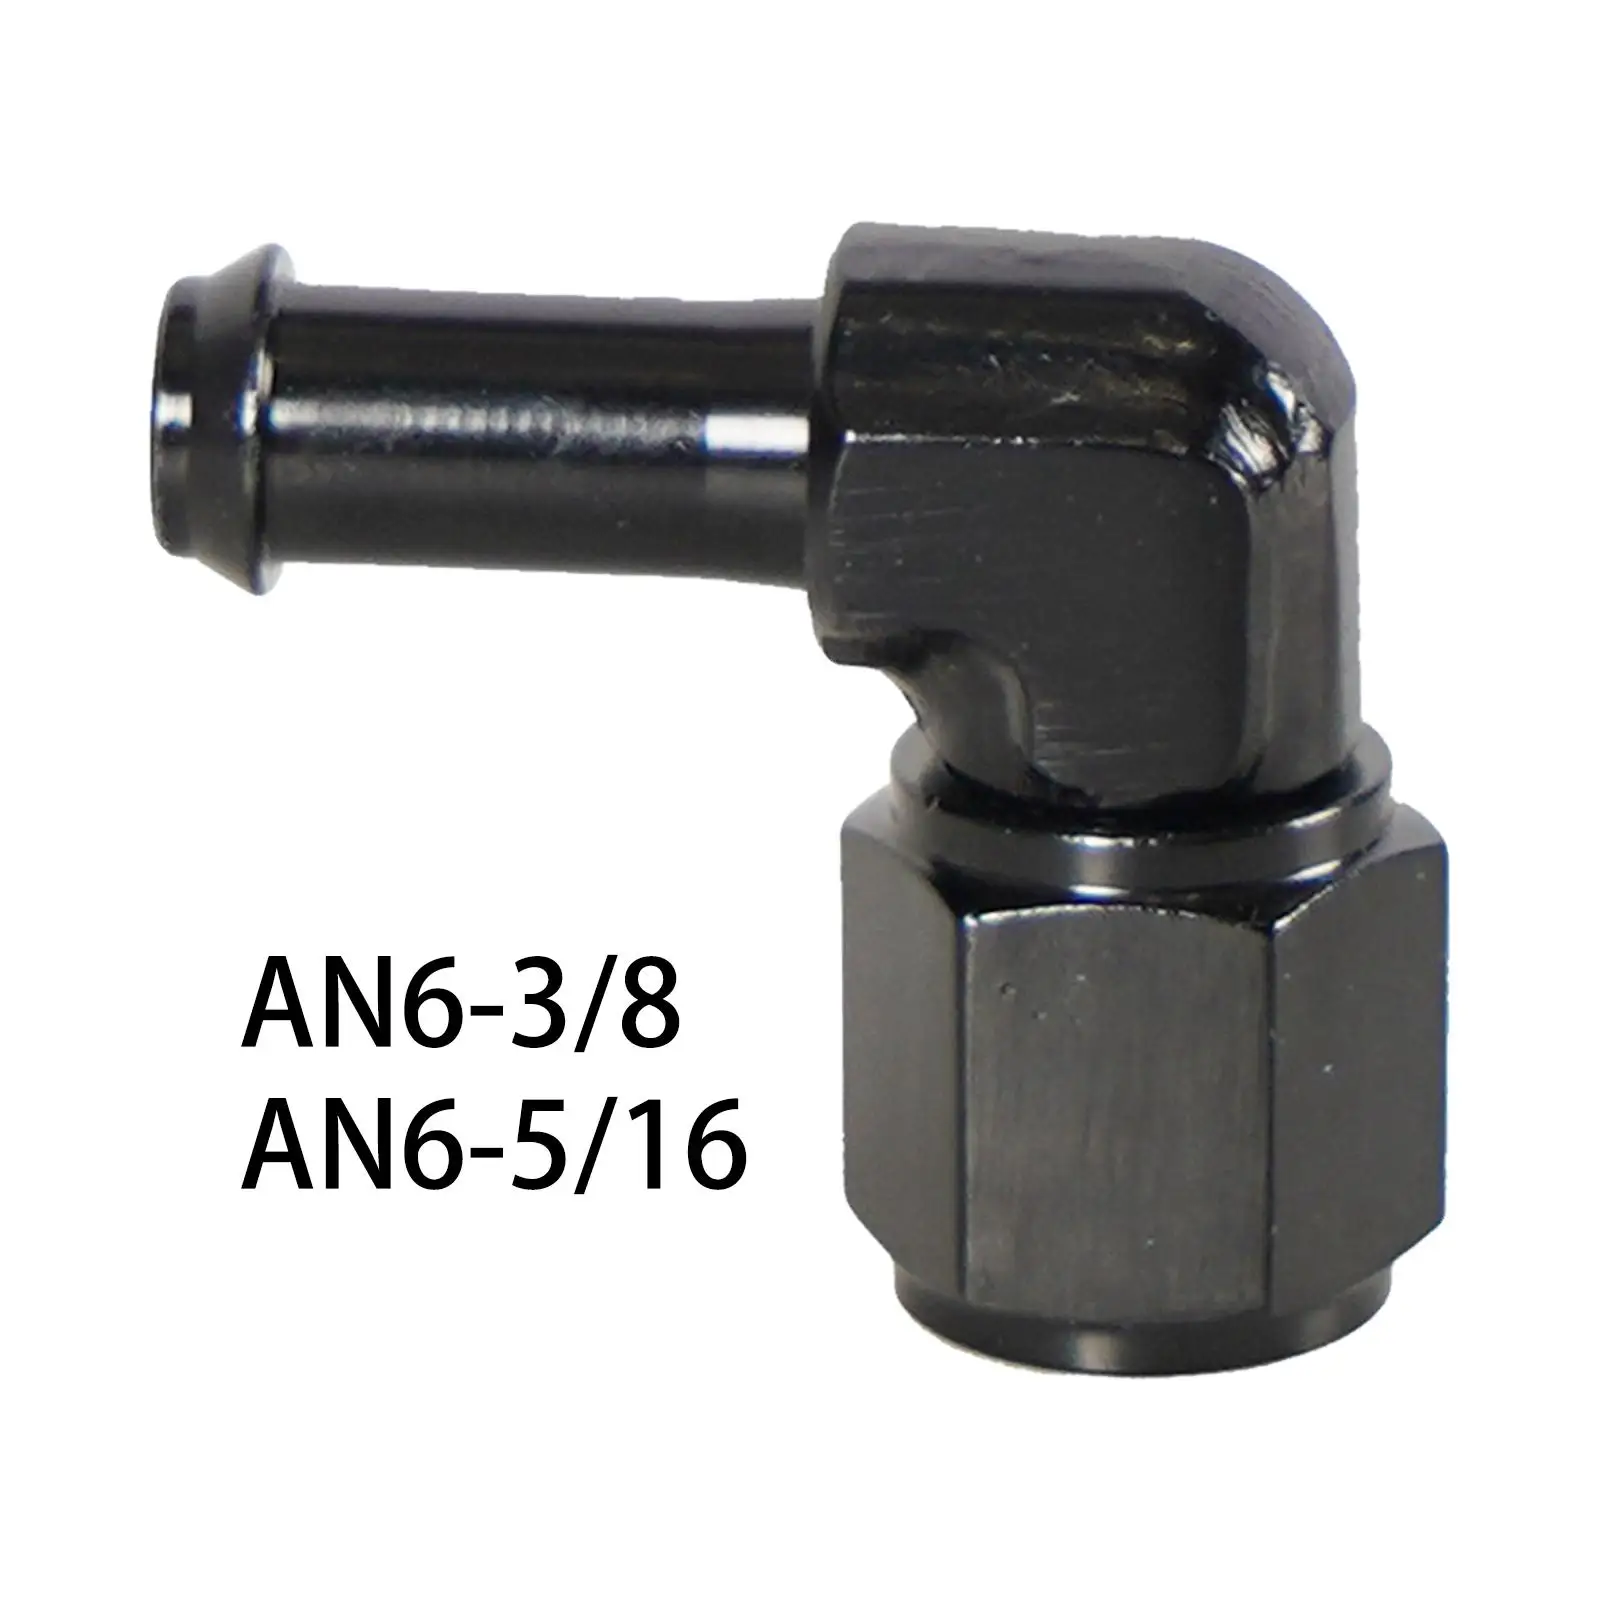 Aluminum 6AN Female Swivel Coupler Hose Fittings Adaptor 90 Degree Black Anodized Finish for Oil Fuel Gas Water Fluid Hose Ends